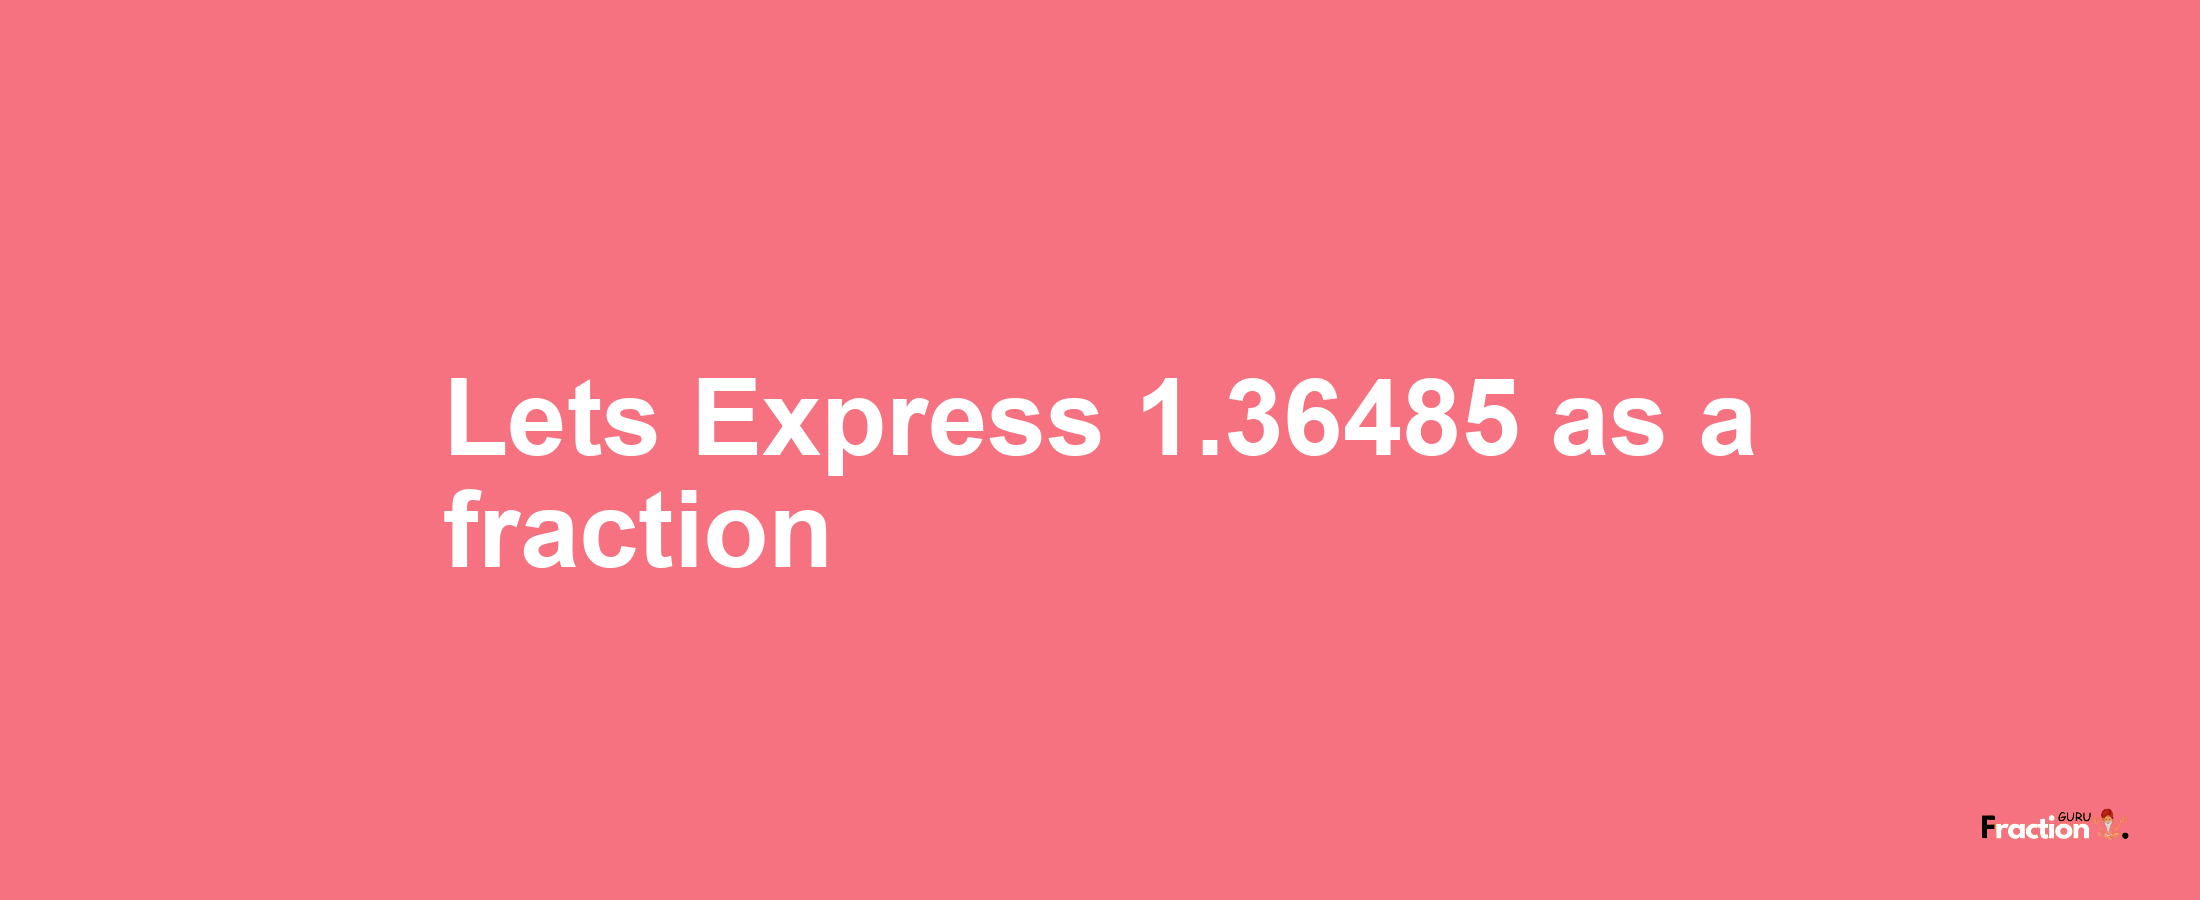 Lets Express 1.36485 as afraction